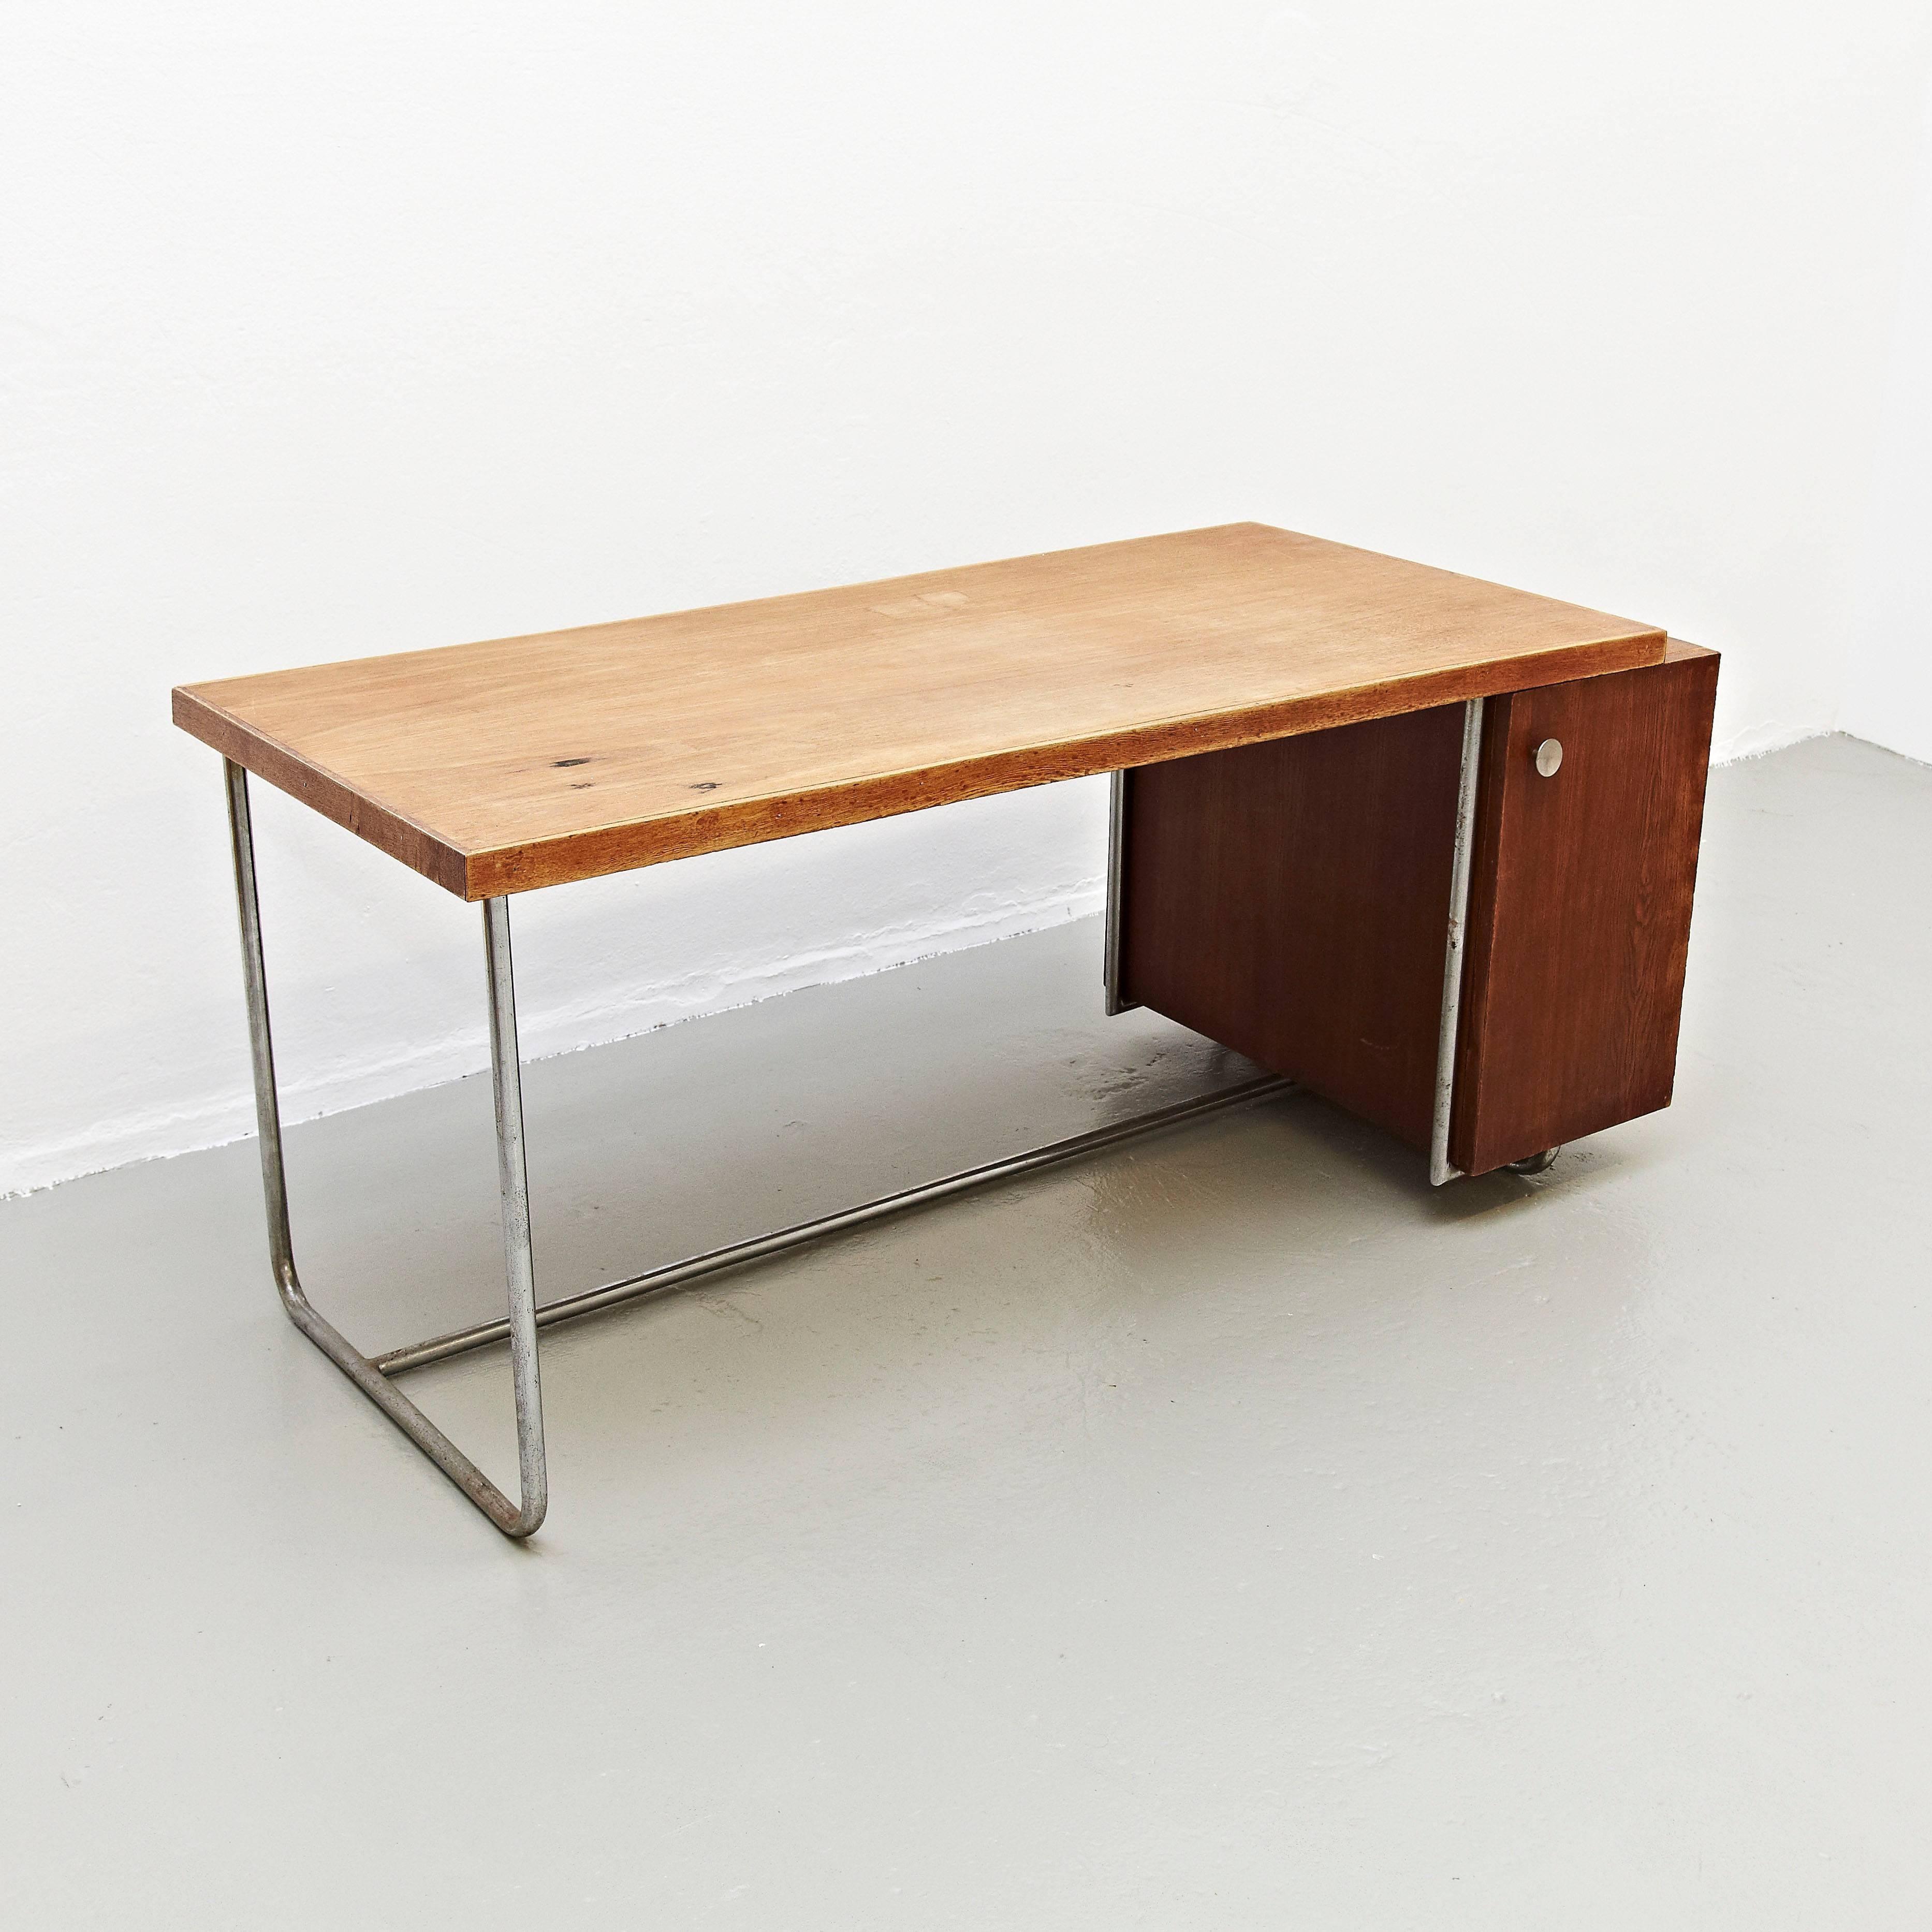 Desk designed by Elmar Berkovich, circa 1930.
Manufactured in Netherlands.
Tubular structure, wood.

This desk is designed by the designer Elmar Berkovich. It is made of a metal tubular structure and wood, all manufactured in Holland around the